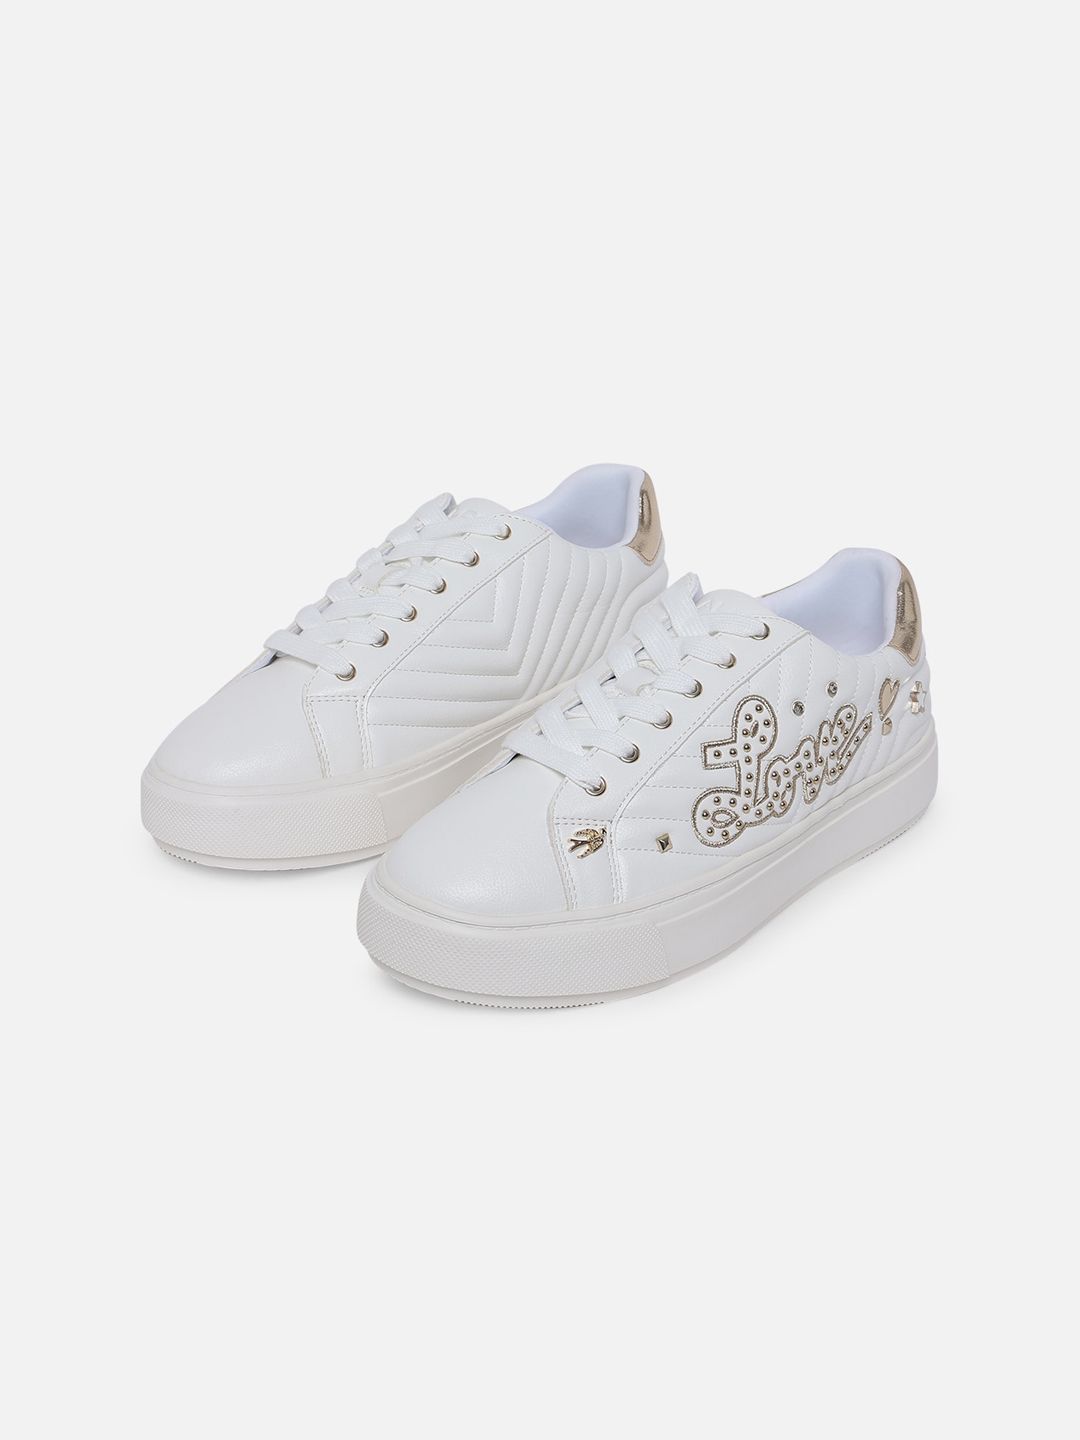 ALDO Women White Lace Up Embellished Sneakers Price in India